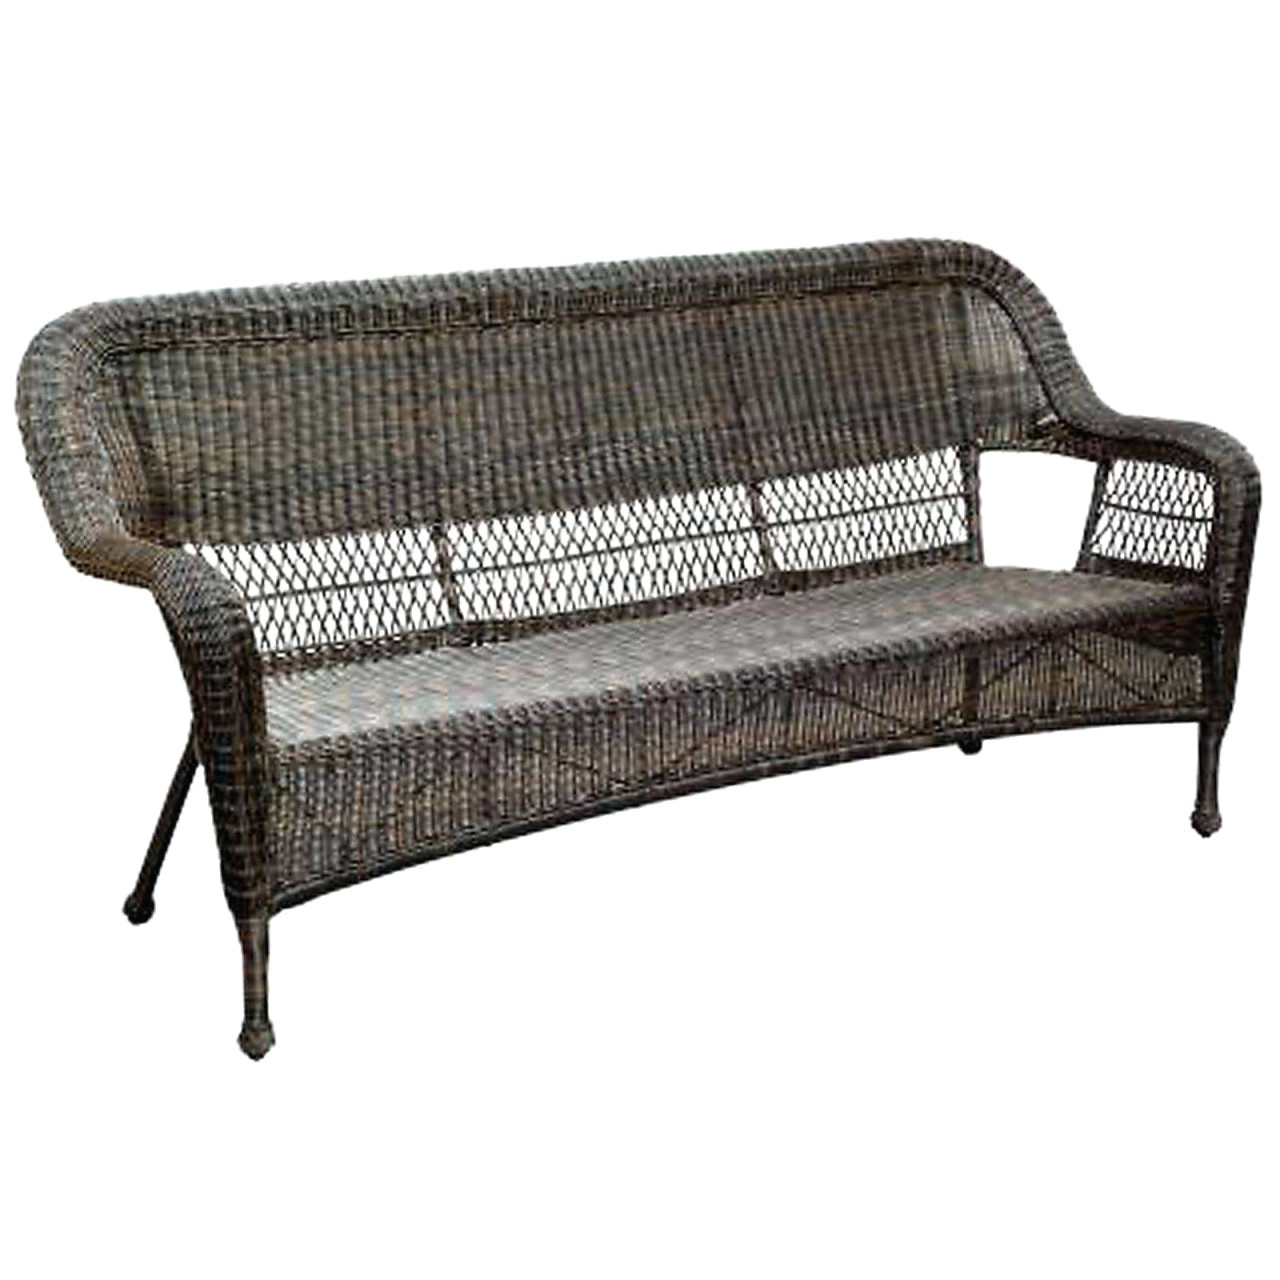 image of wicker chaise lounge coolest wicker outdoor sofa 0d patio chairs